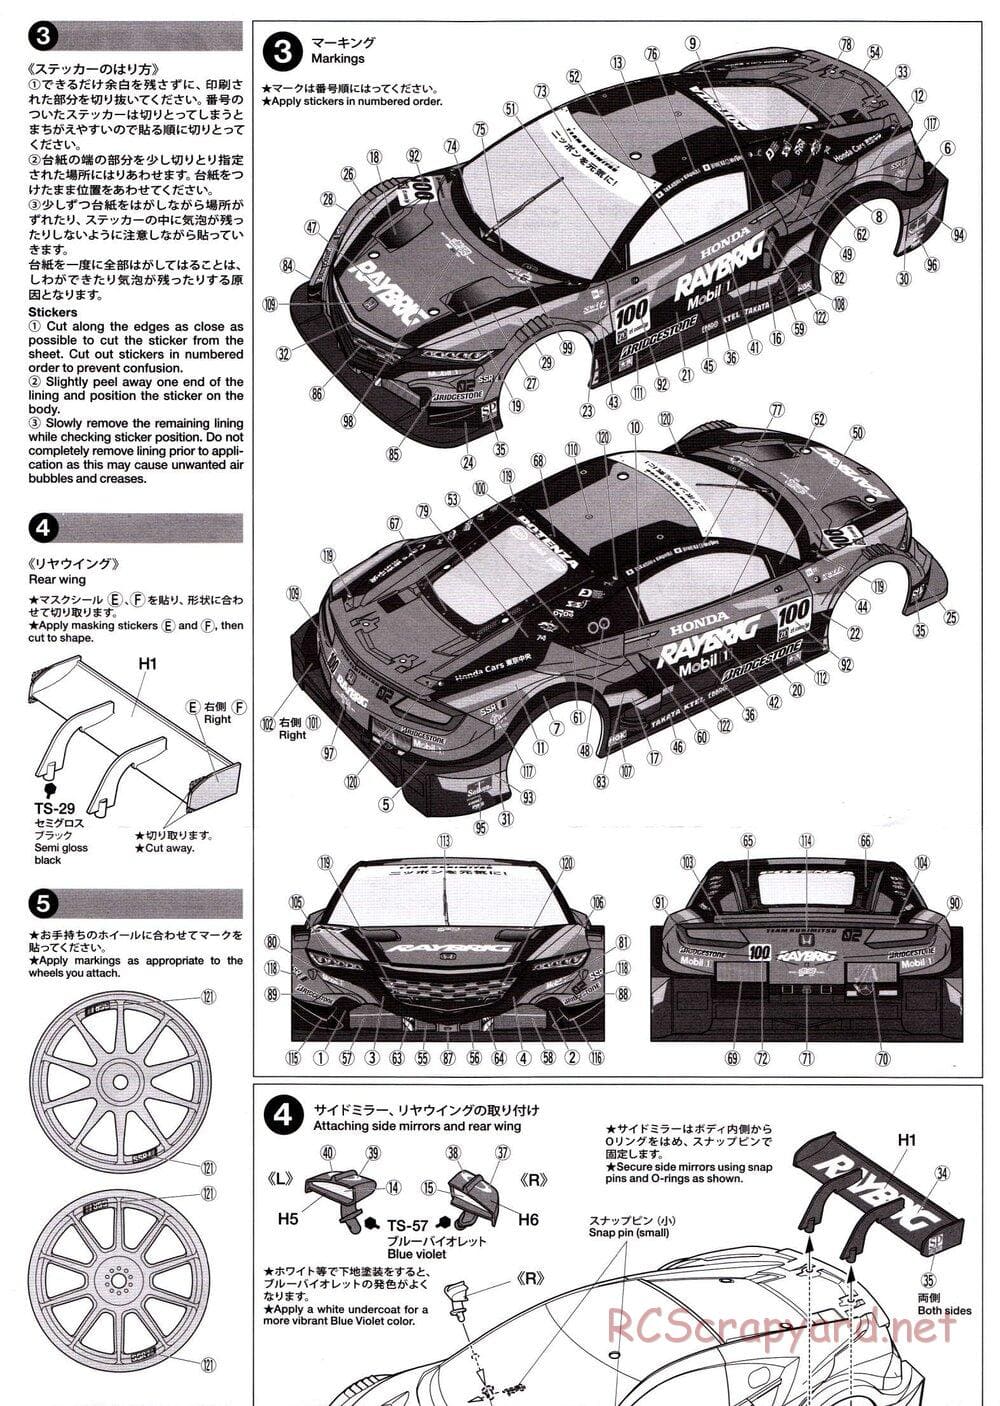 Tamiya - Raybrig NSX Concept-GT - TT-02 Chassis - Body Manual - Page 3